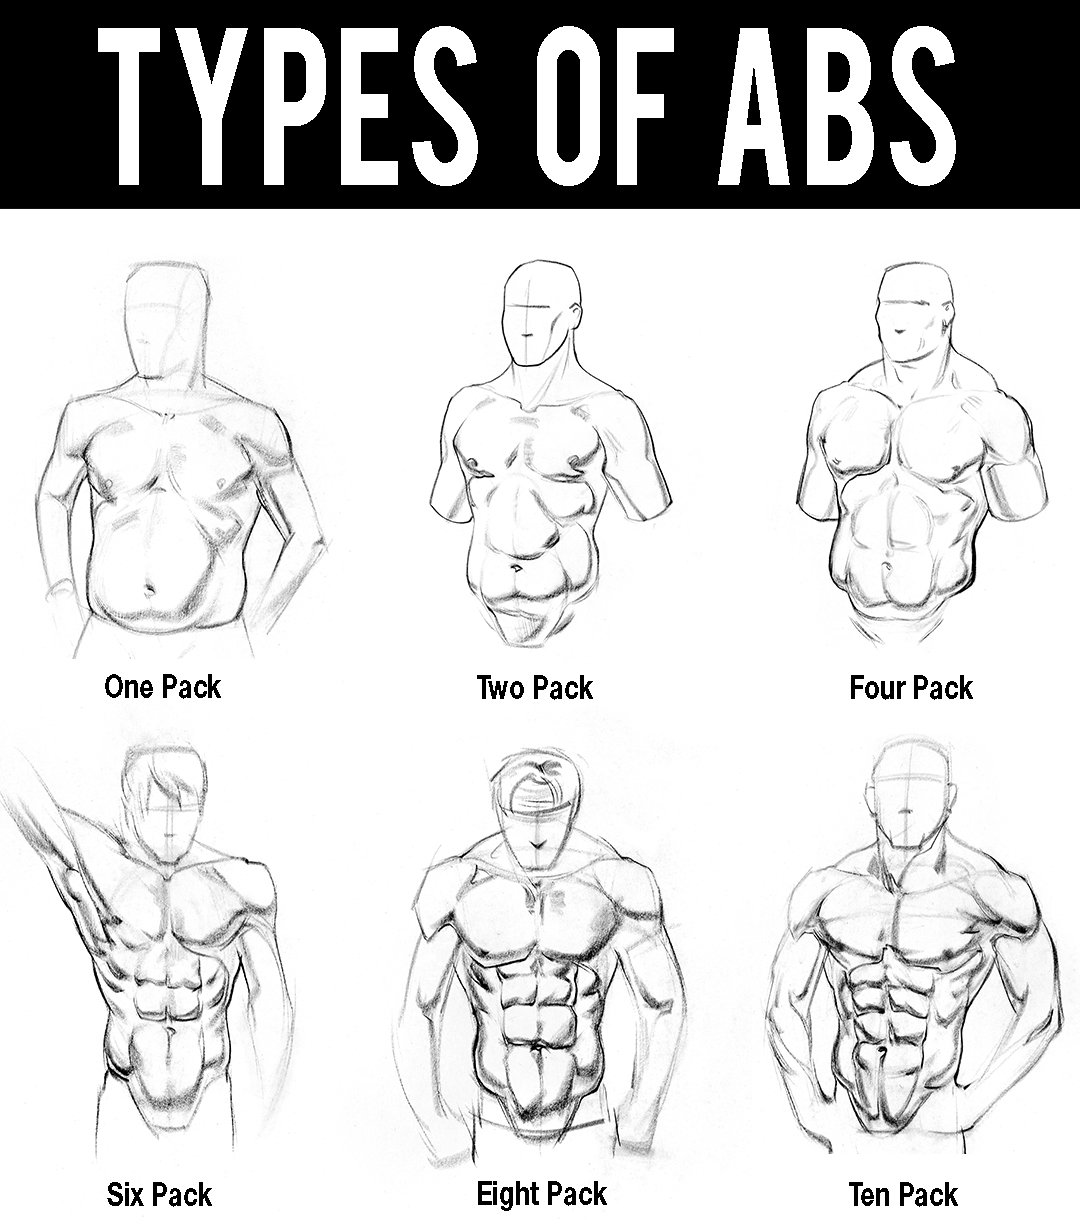 Stan Prokopenko on X: Everyone knows the 6 pack, but there's many ways Abs  can appear. If you don't know how a 10-pack is possible, check out the free  premium trial on